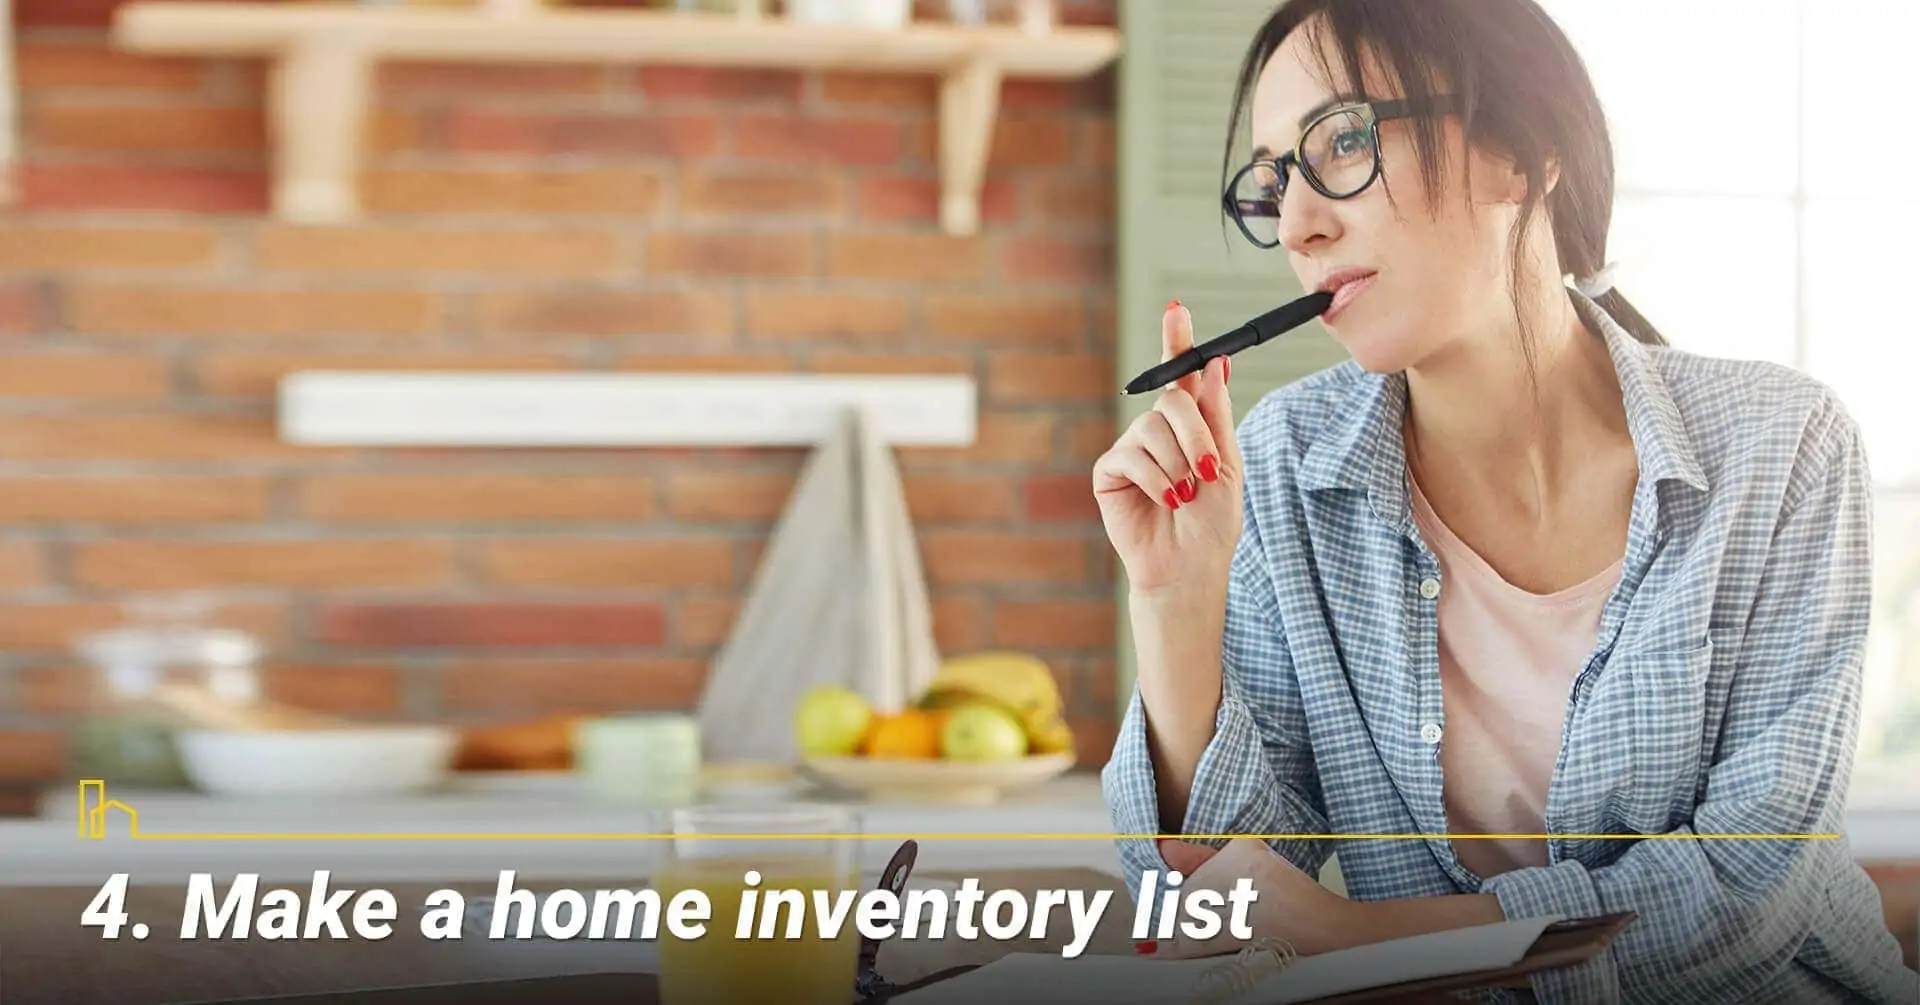 Make a home inventory list, list all items in your home